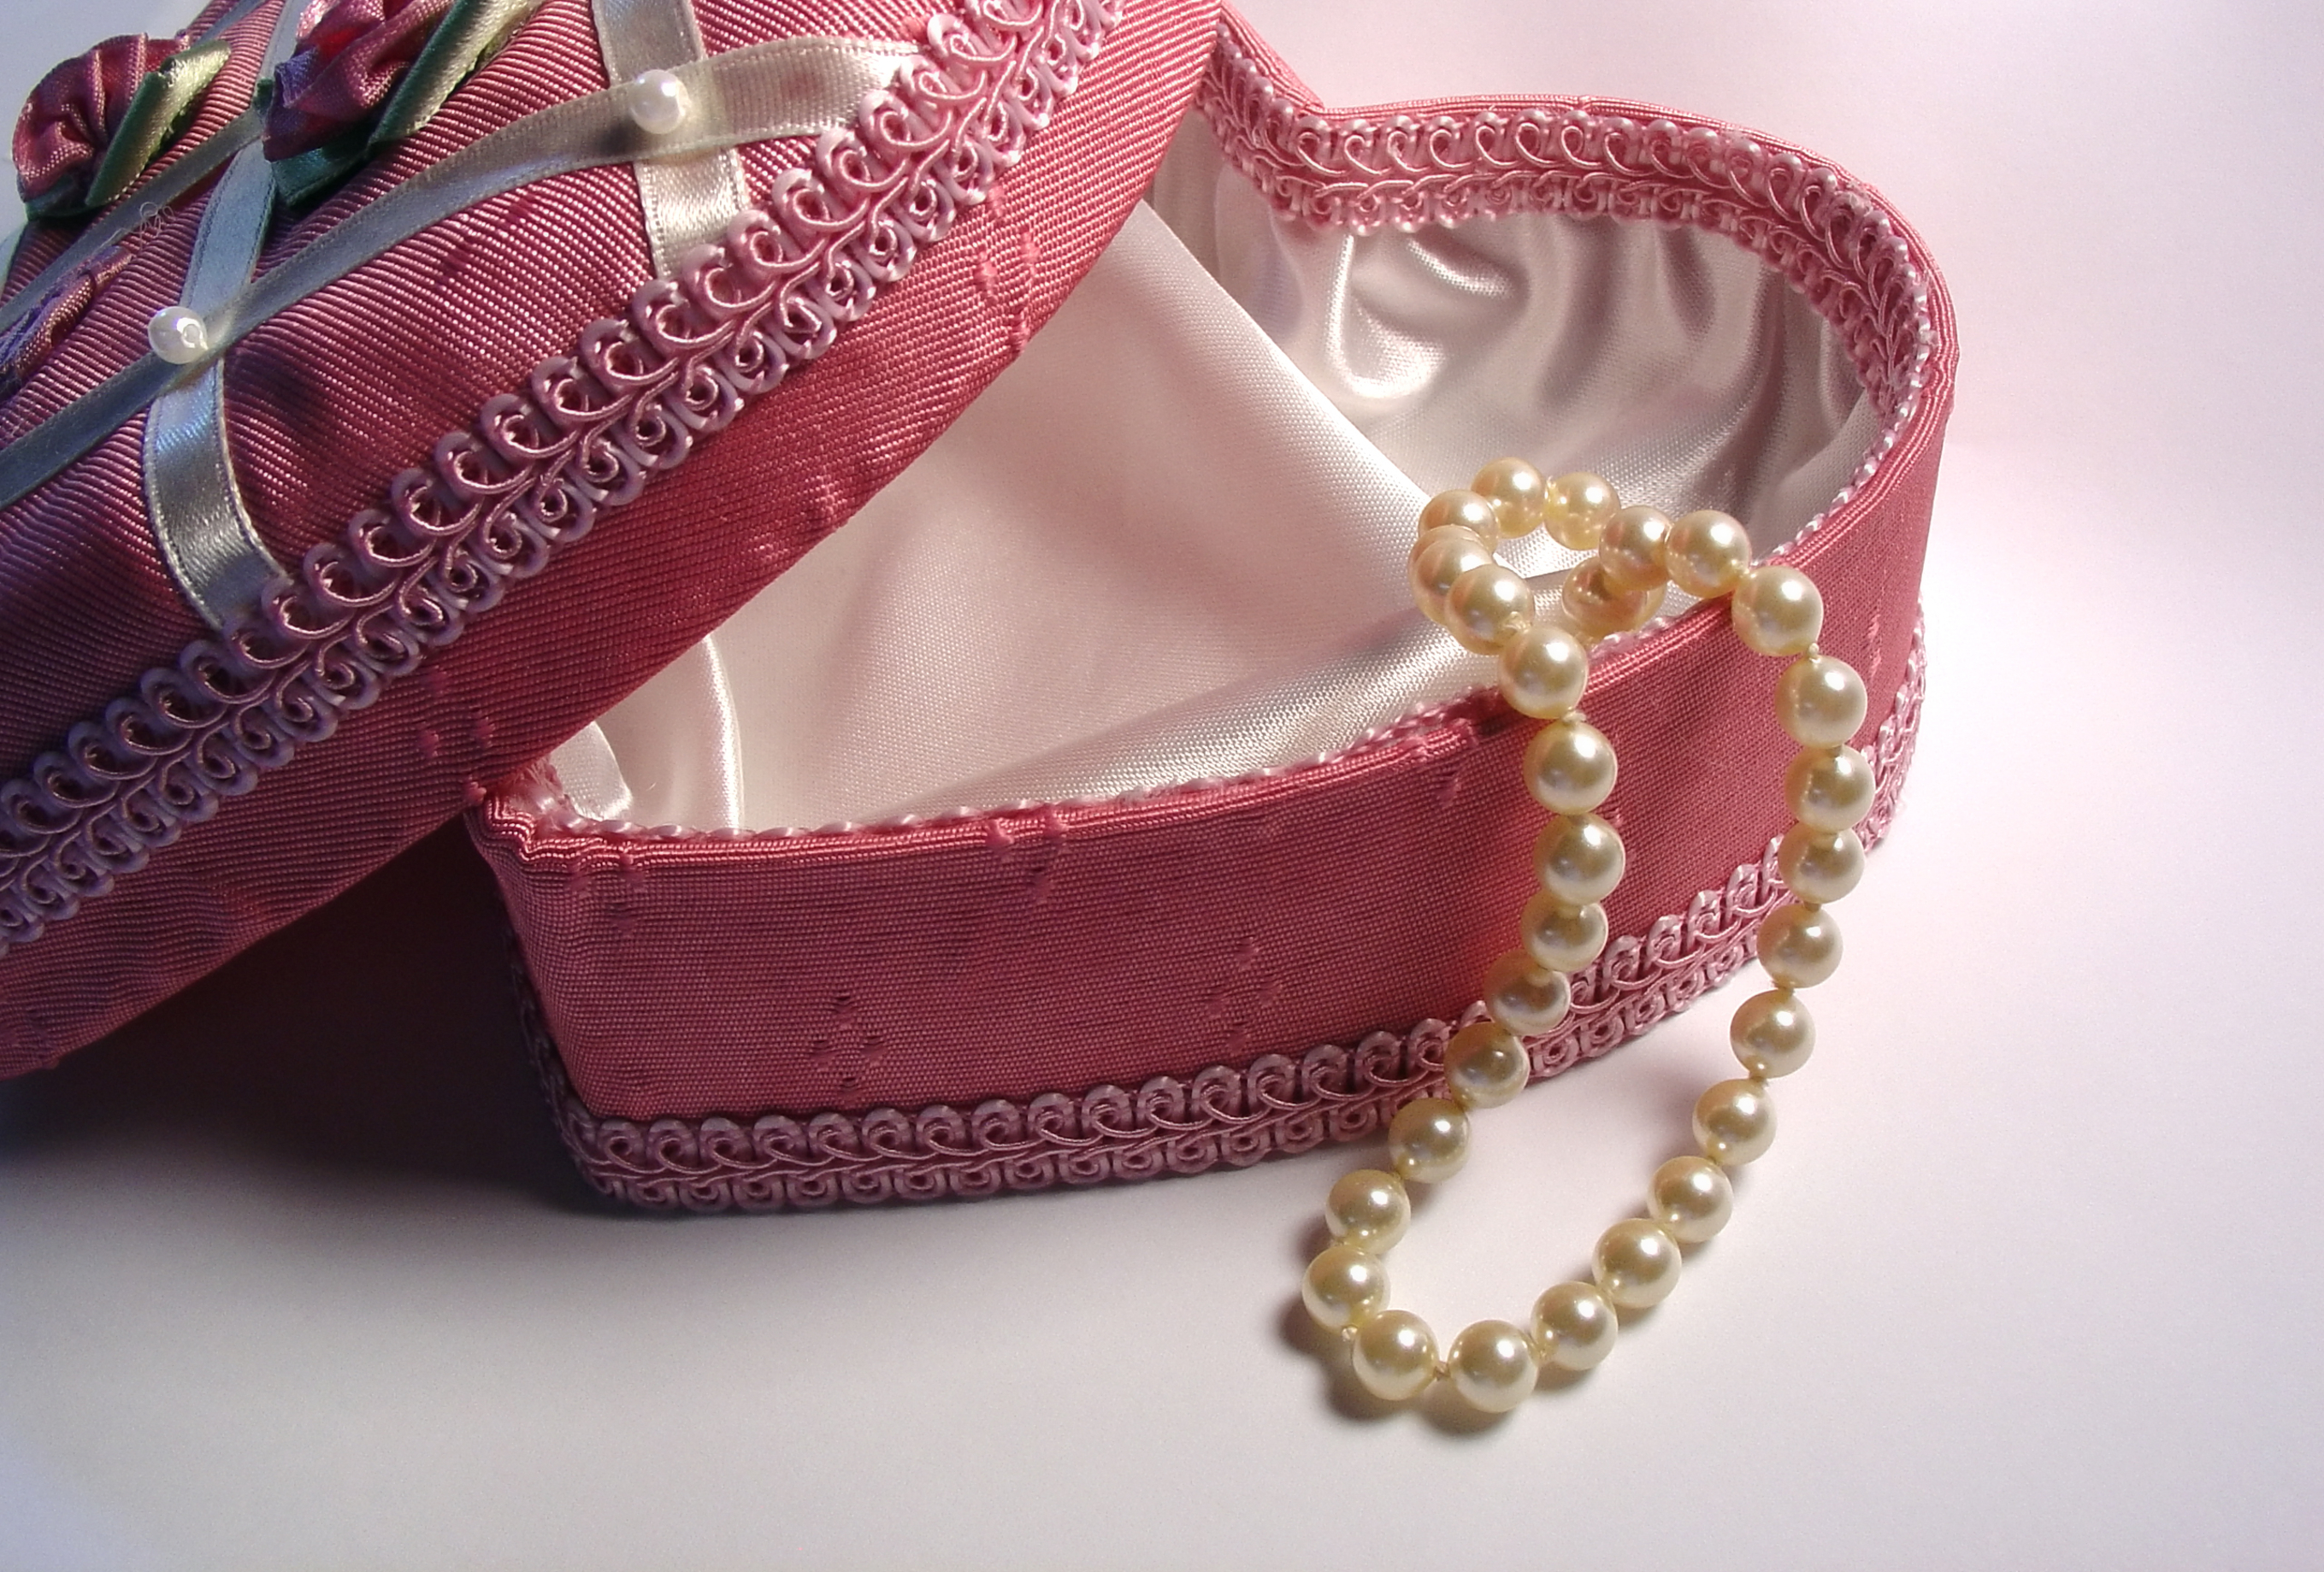 Hearts and pearls in a box